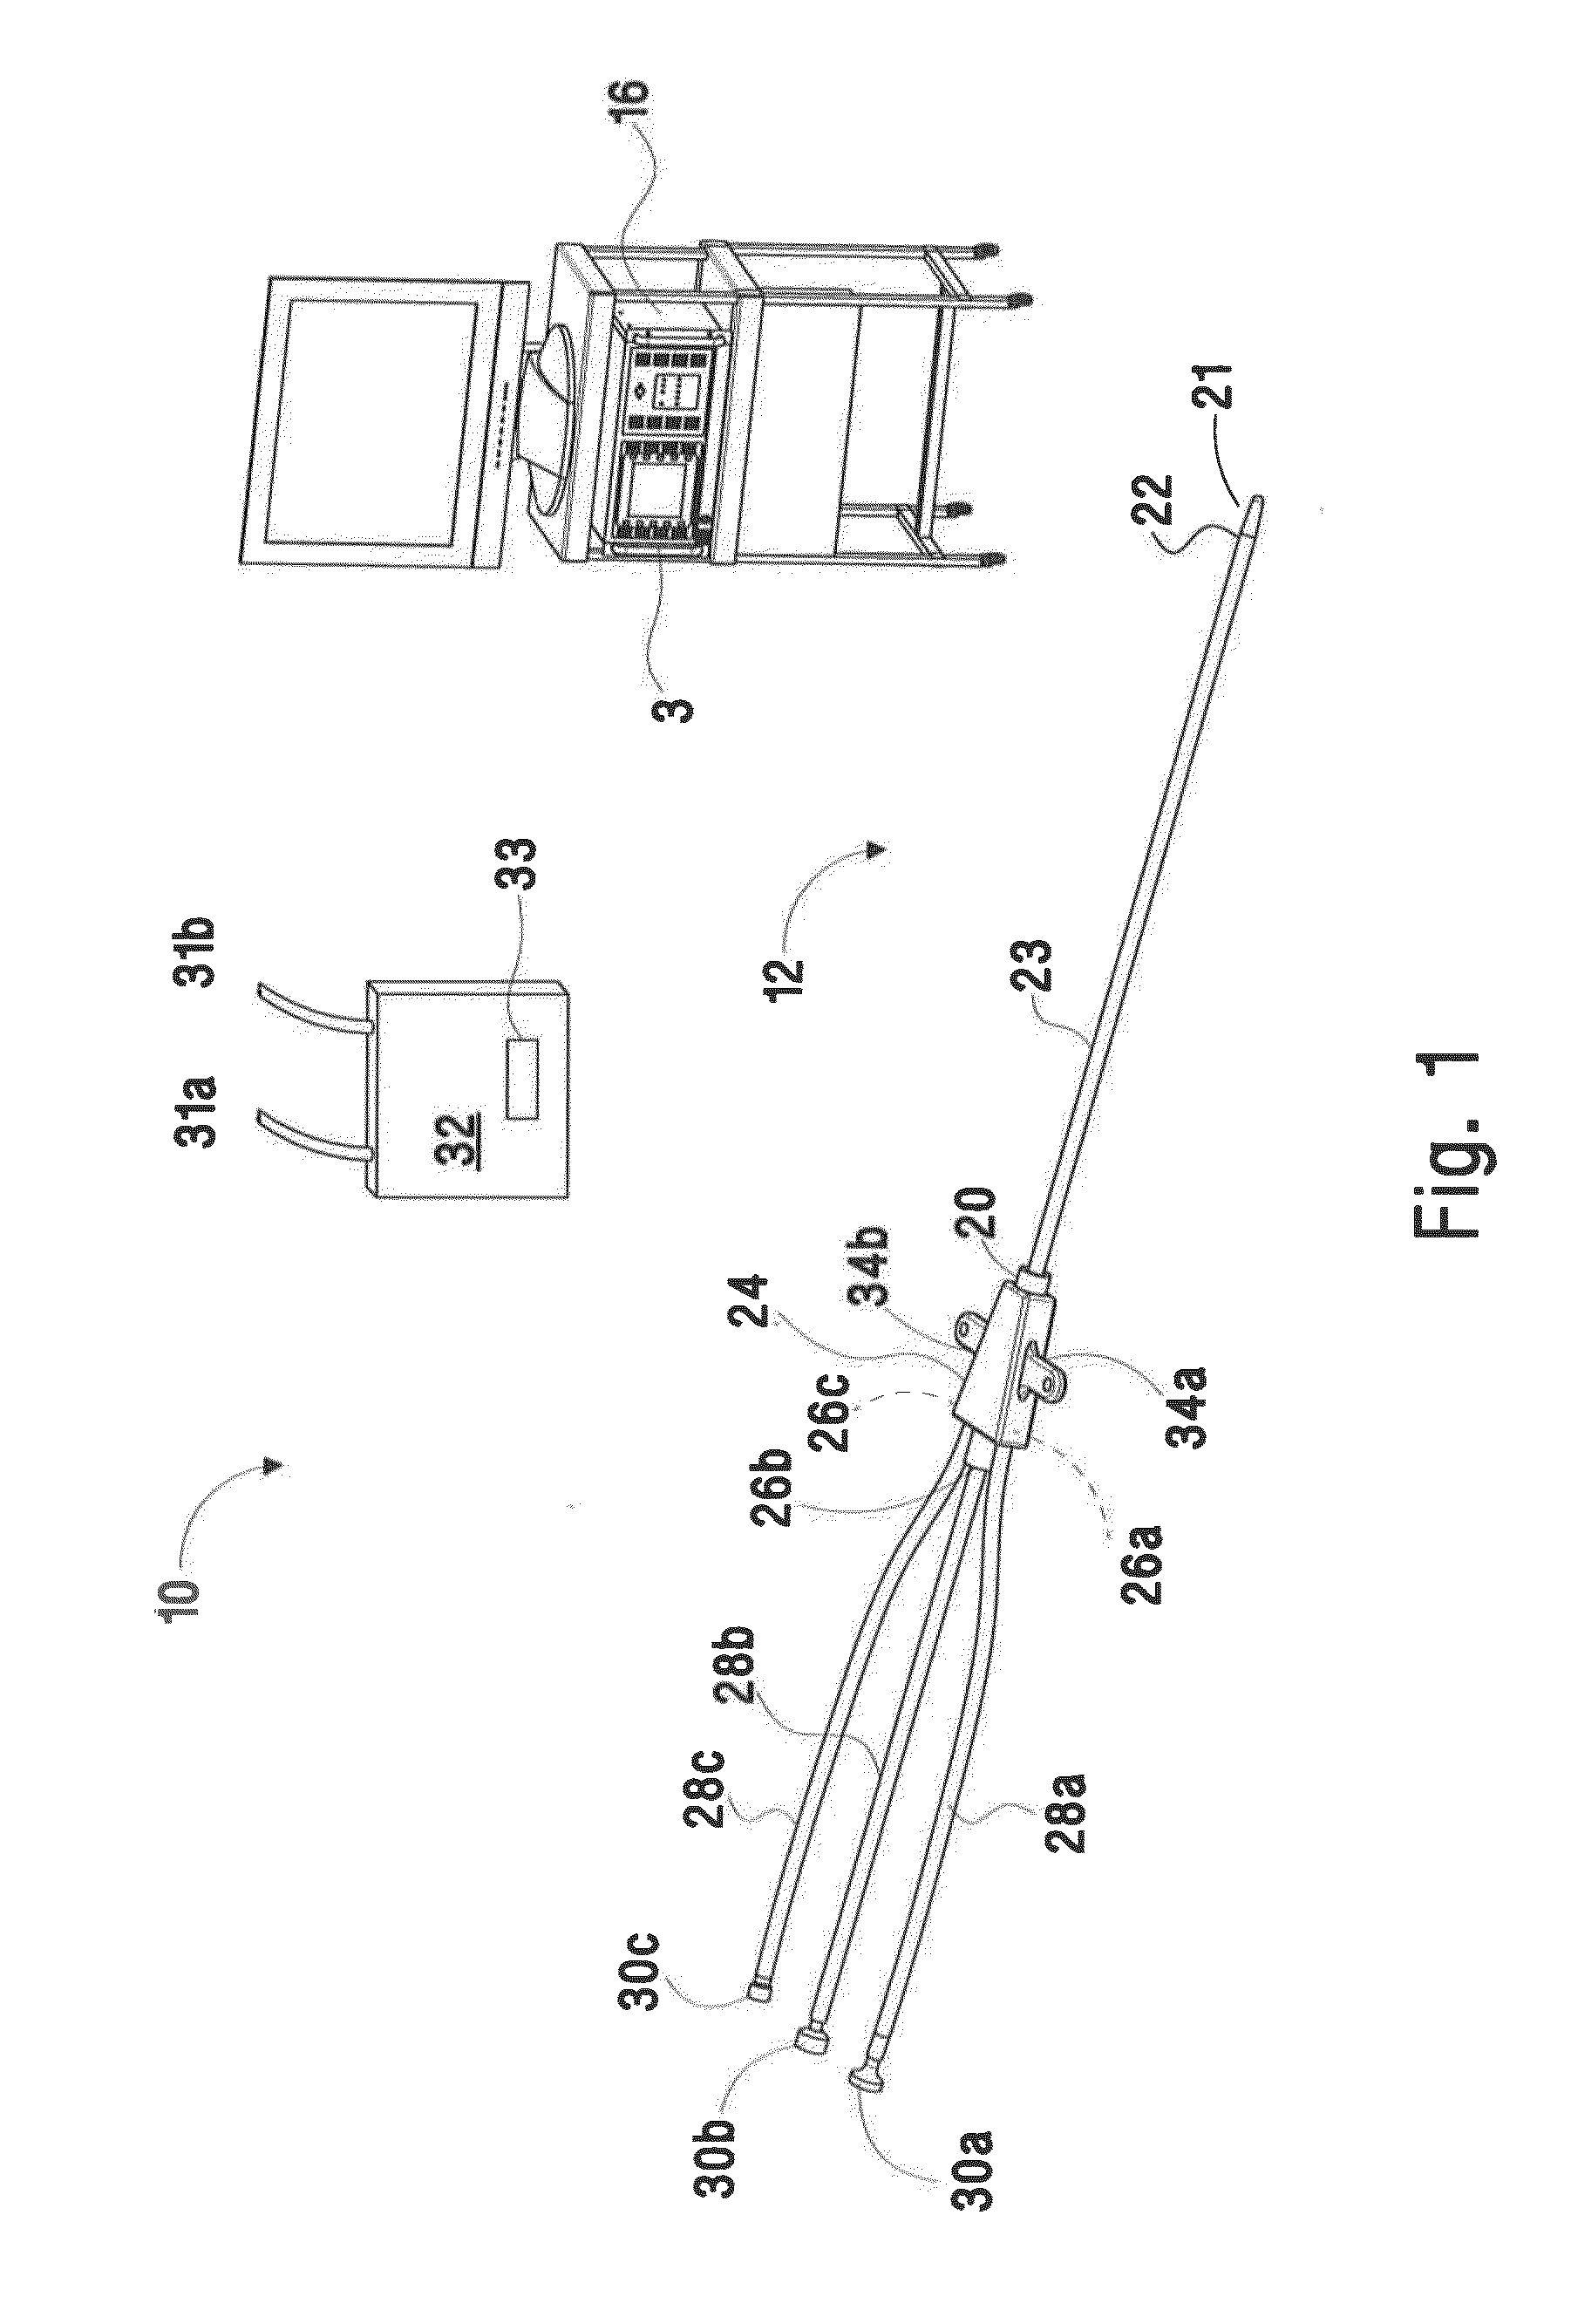 Microwave ablation catheter and method of utilizing the same